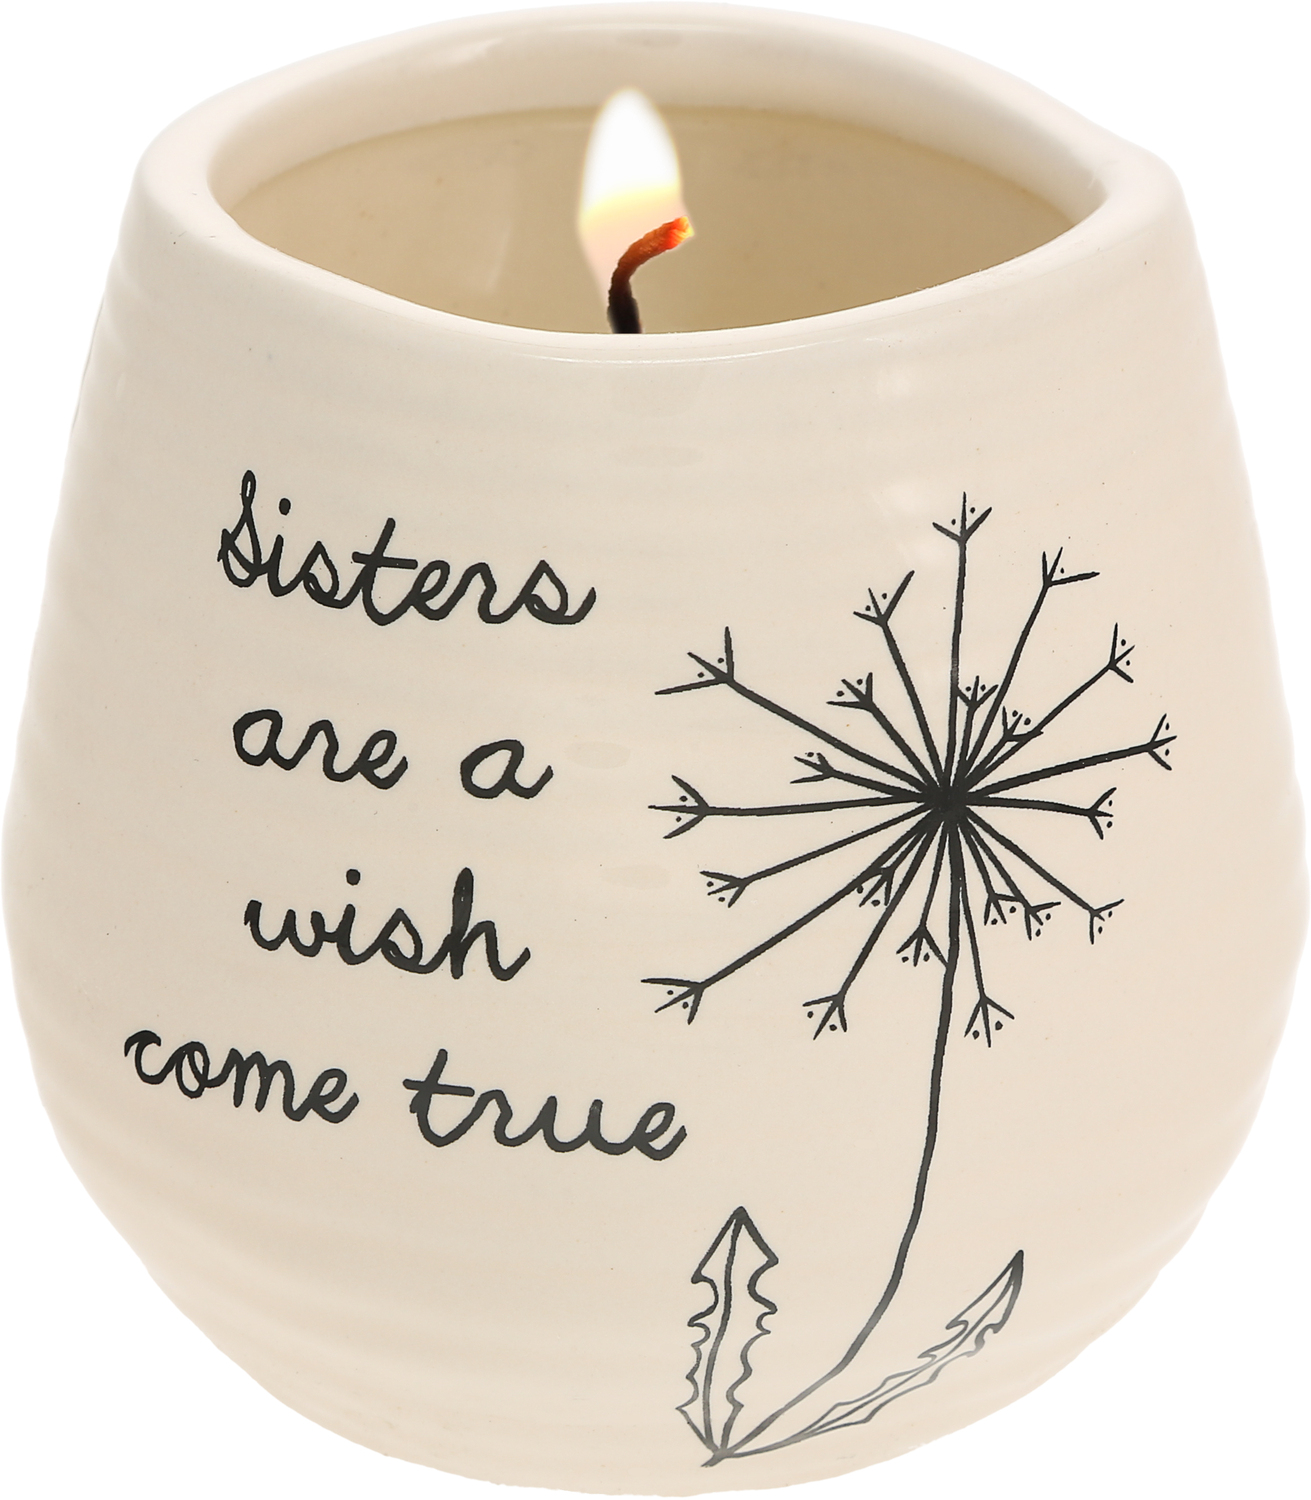 Sister by Dandelion Wishes - Sister - 8 oz - 100% Soy Wax Candle
Scent: Serenity